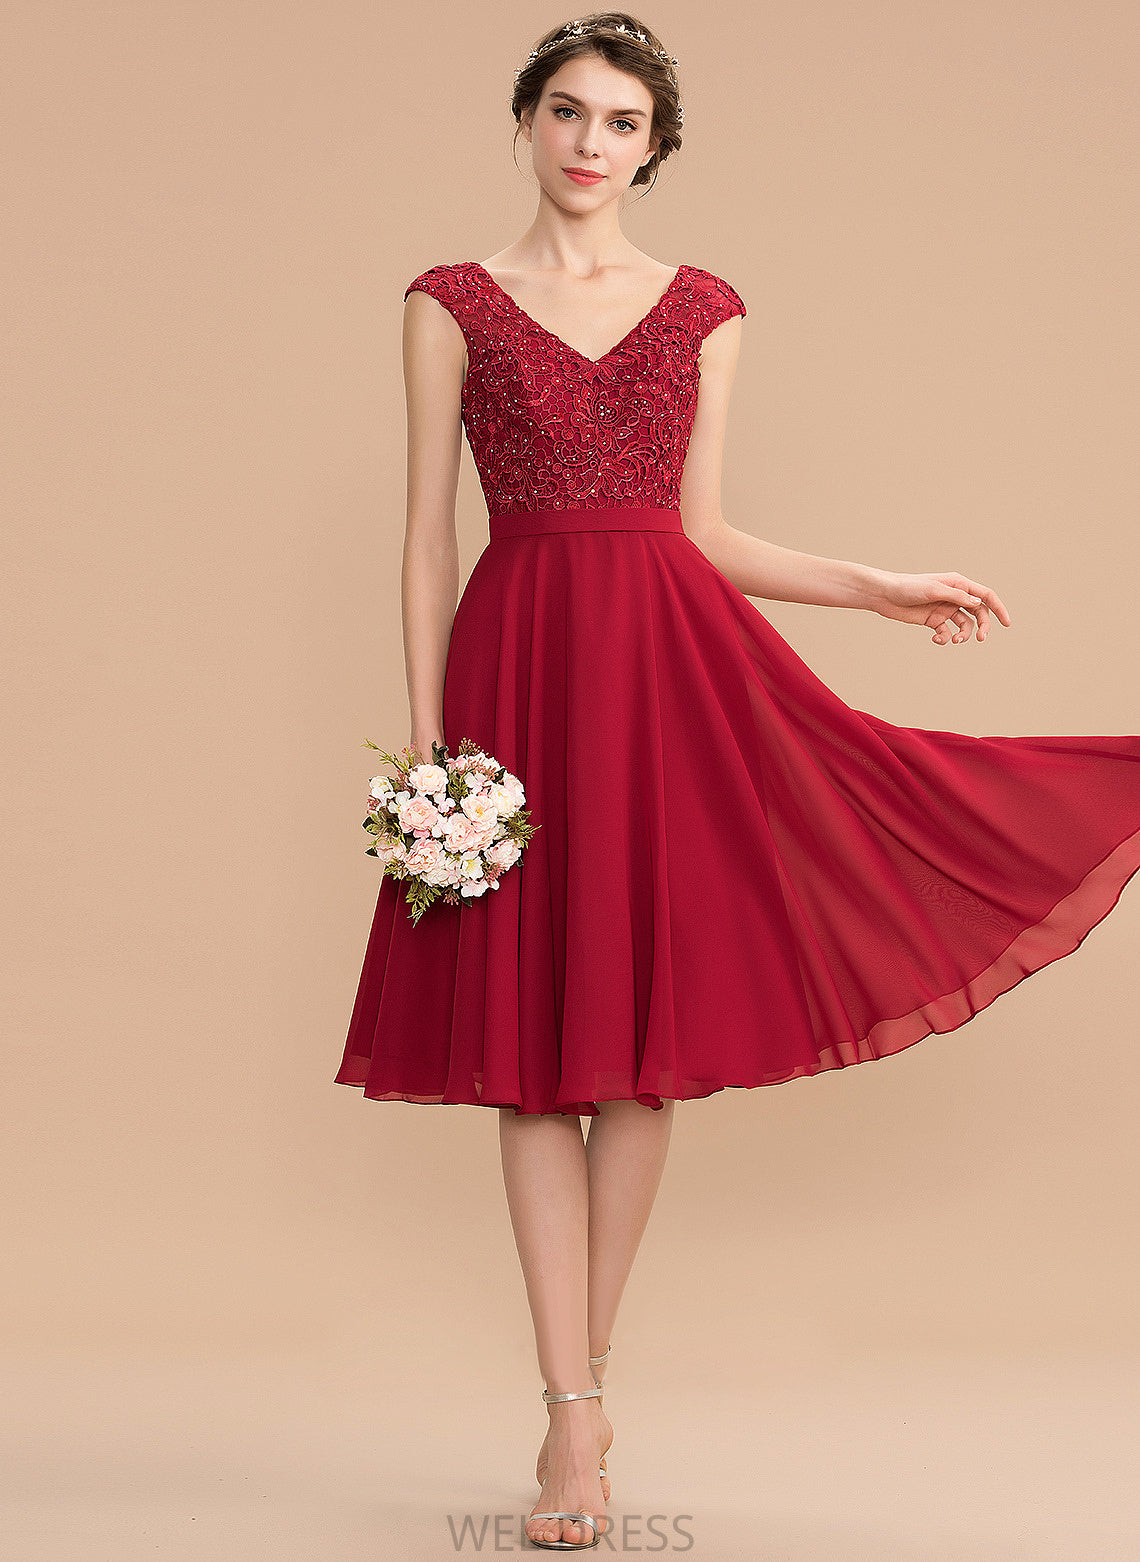 Beading V-neck Knee-Length Chiffon Homecoming Dresses Homecoming With Lace A-Line Allison Dress